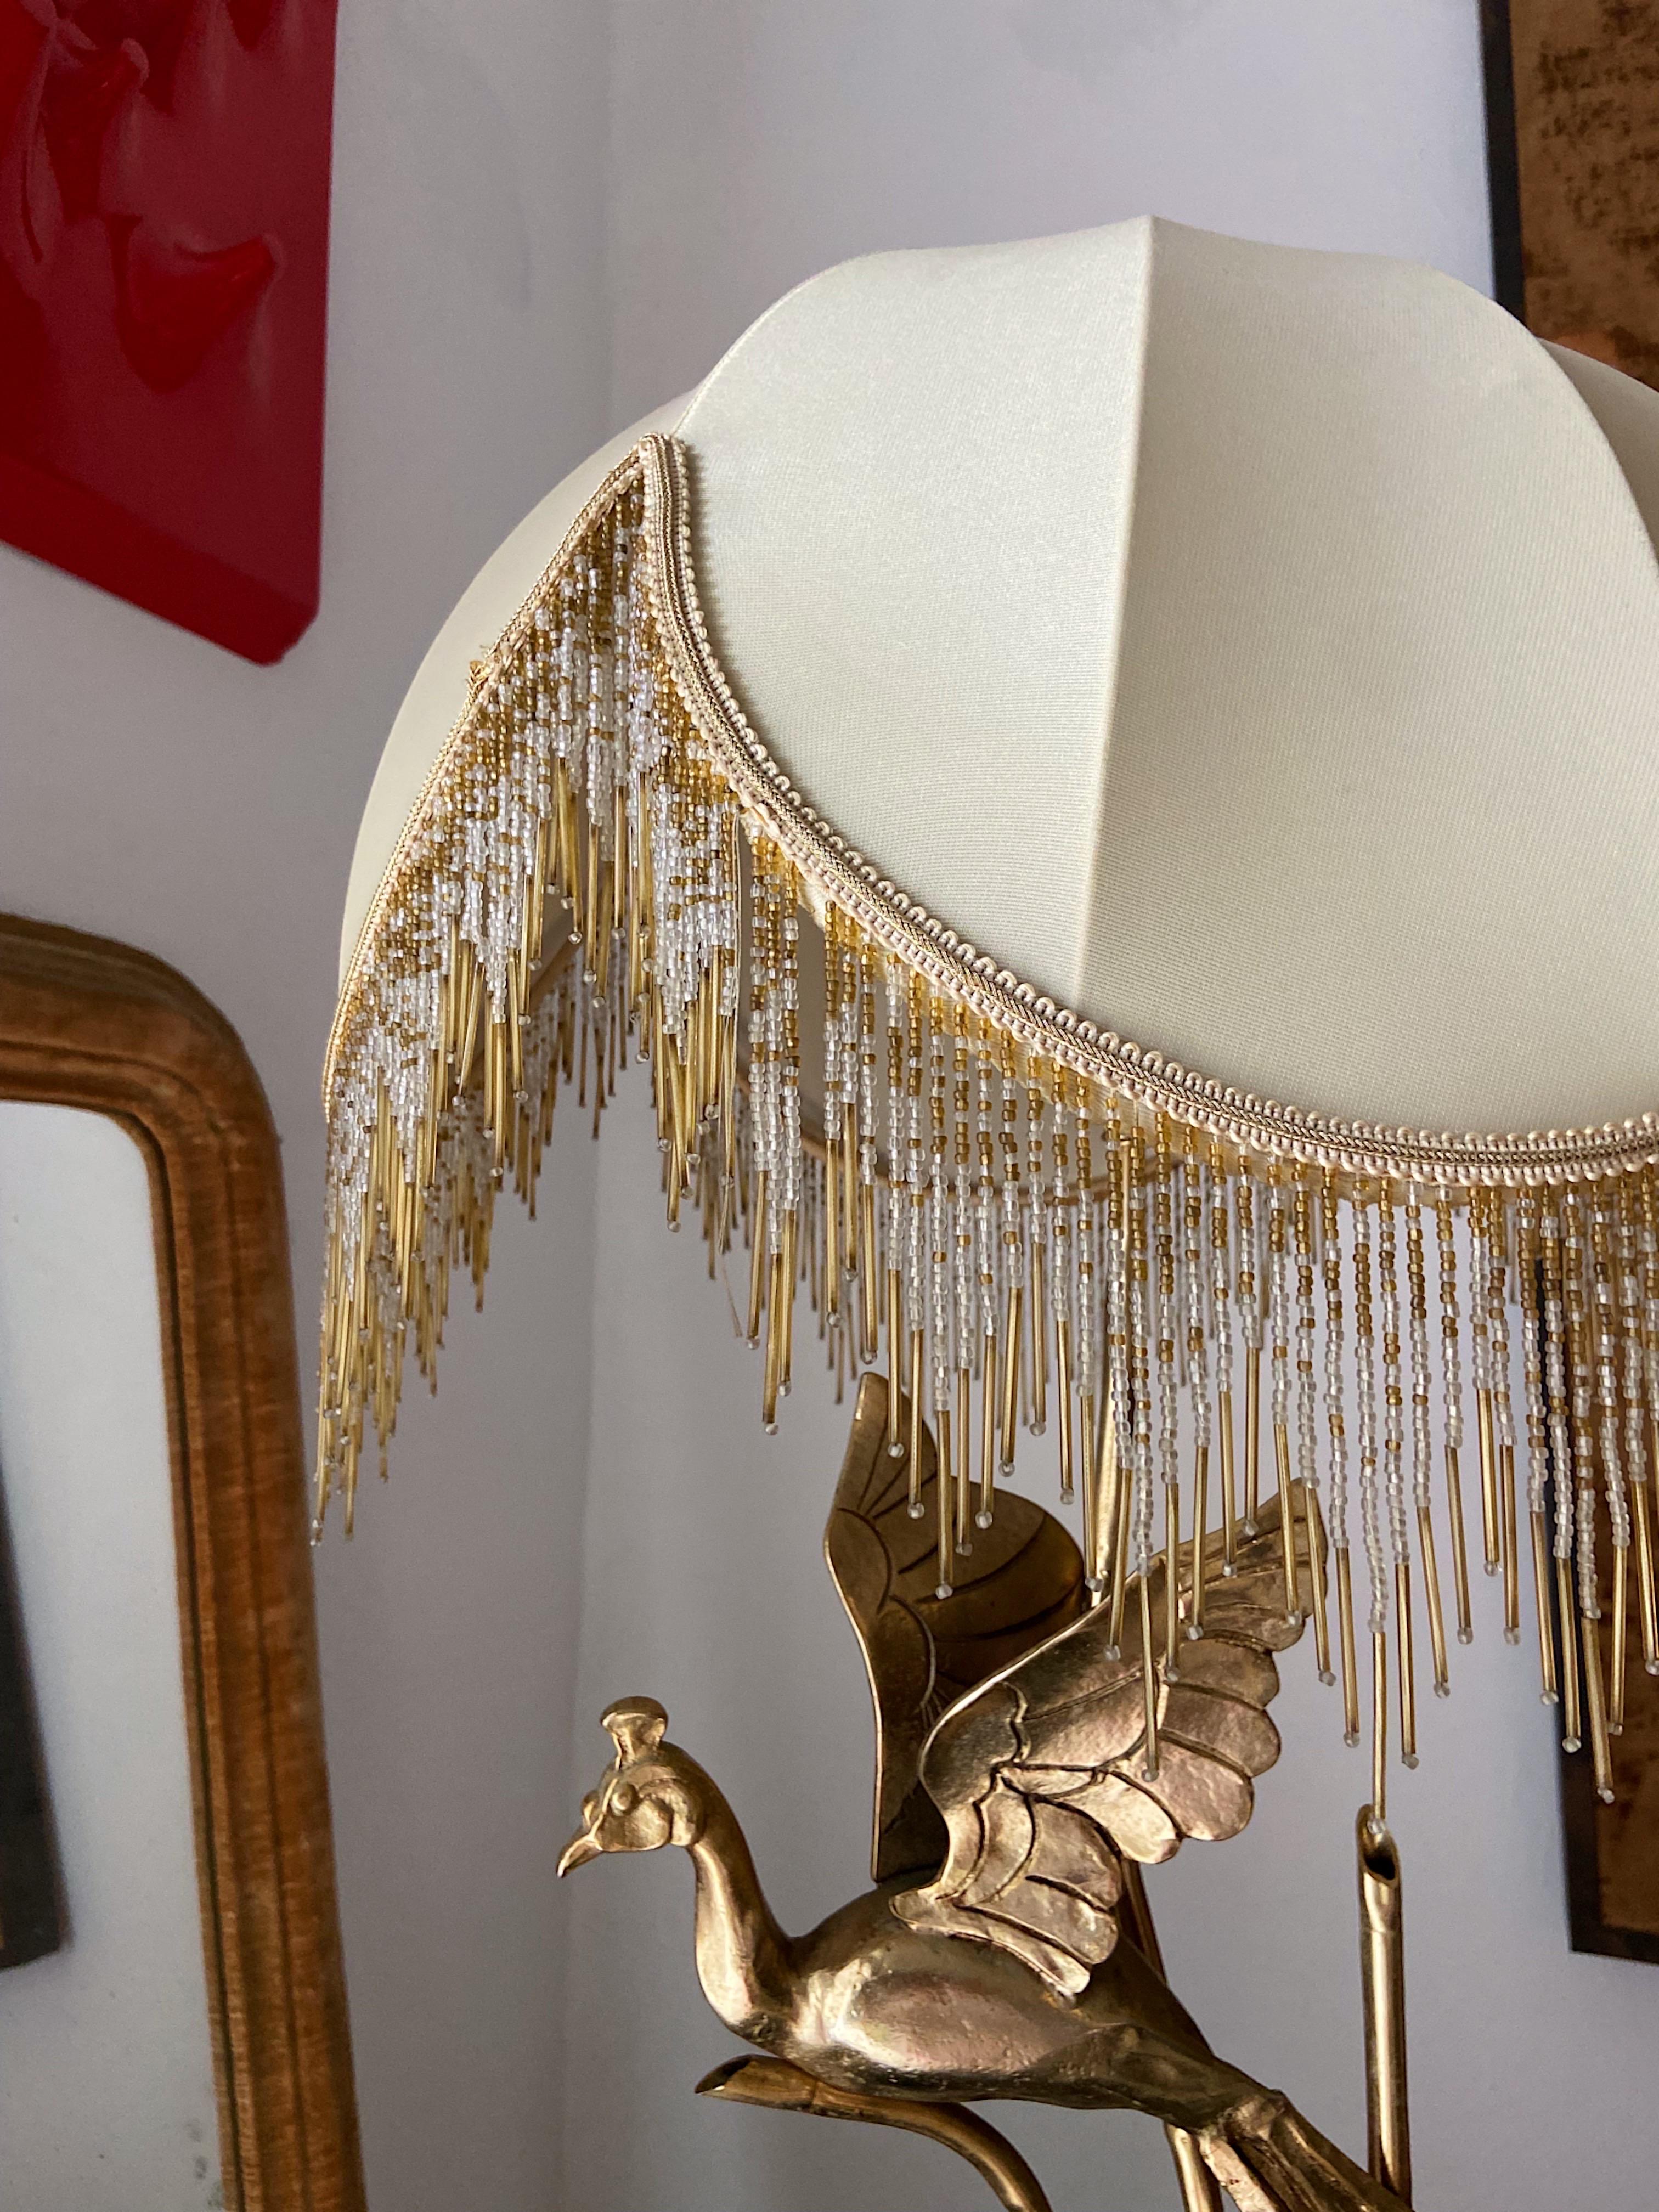 Large Peacock Table Lamp by Lanciotto Galeotti for L''originale, Italy, 1970s For Sale 1